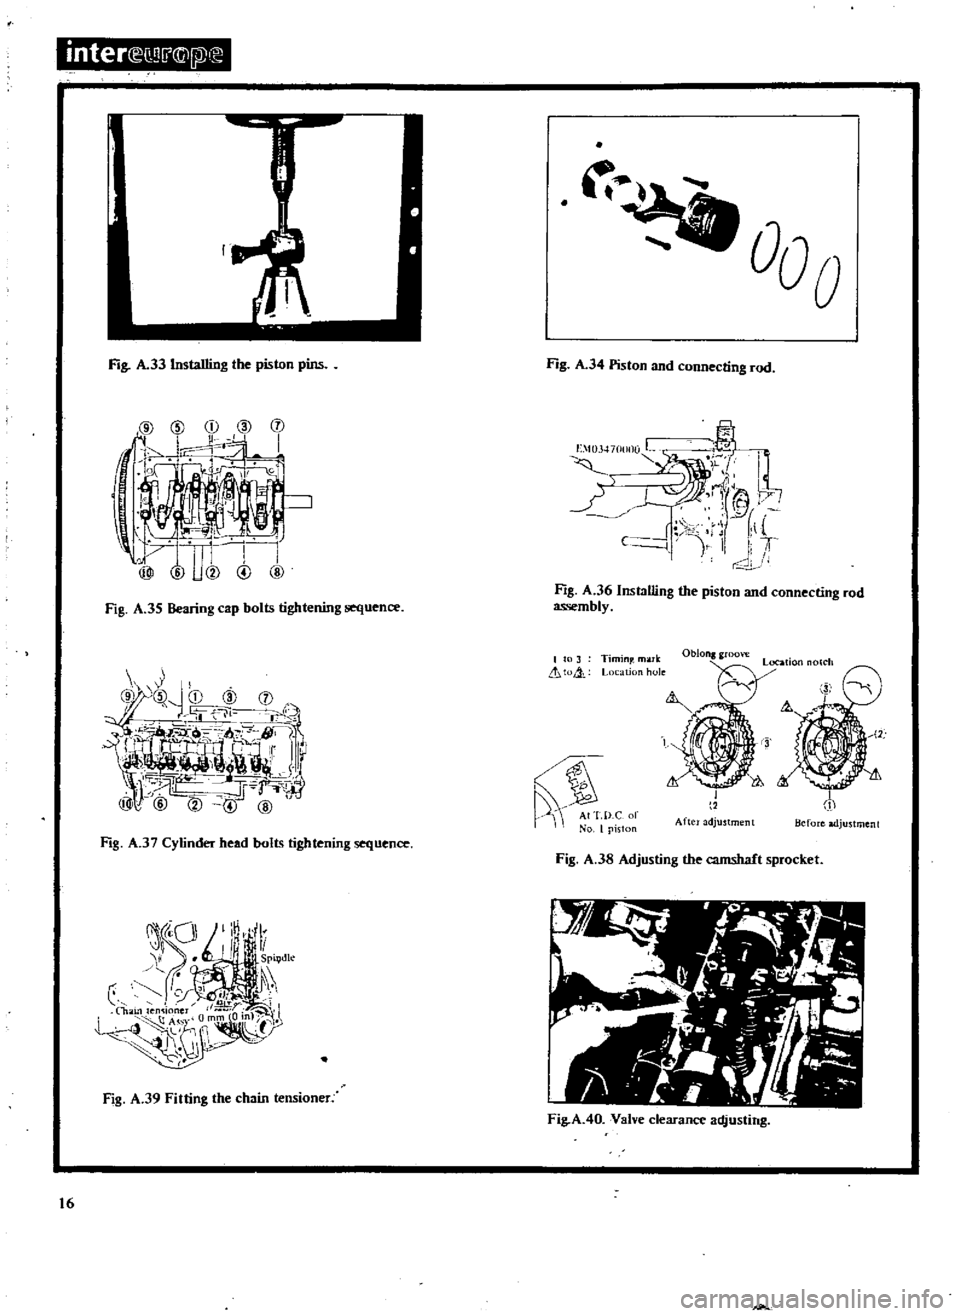 DATSUN 510 1969  Service User Guide 
inter

Q1
jX 
E

Fig 
A 
33

Installing 
the

piston

pins 
Fig 
A 
34

Piston 
and

connecting 
rod

cD

I 
E

103470t

O 
L 
I

1

I

riC

J 
lt
I

t

1

1

C

j 
I

If

I

r

Fig 
A
35

Bearing 
c